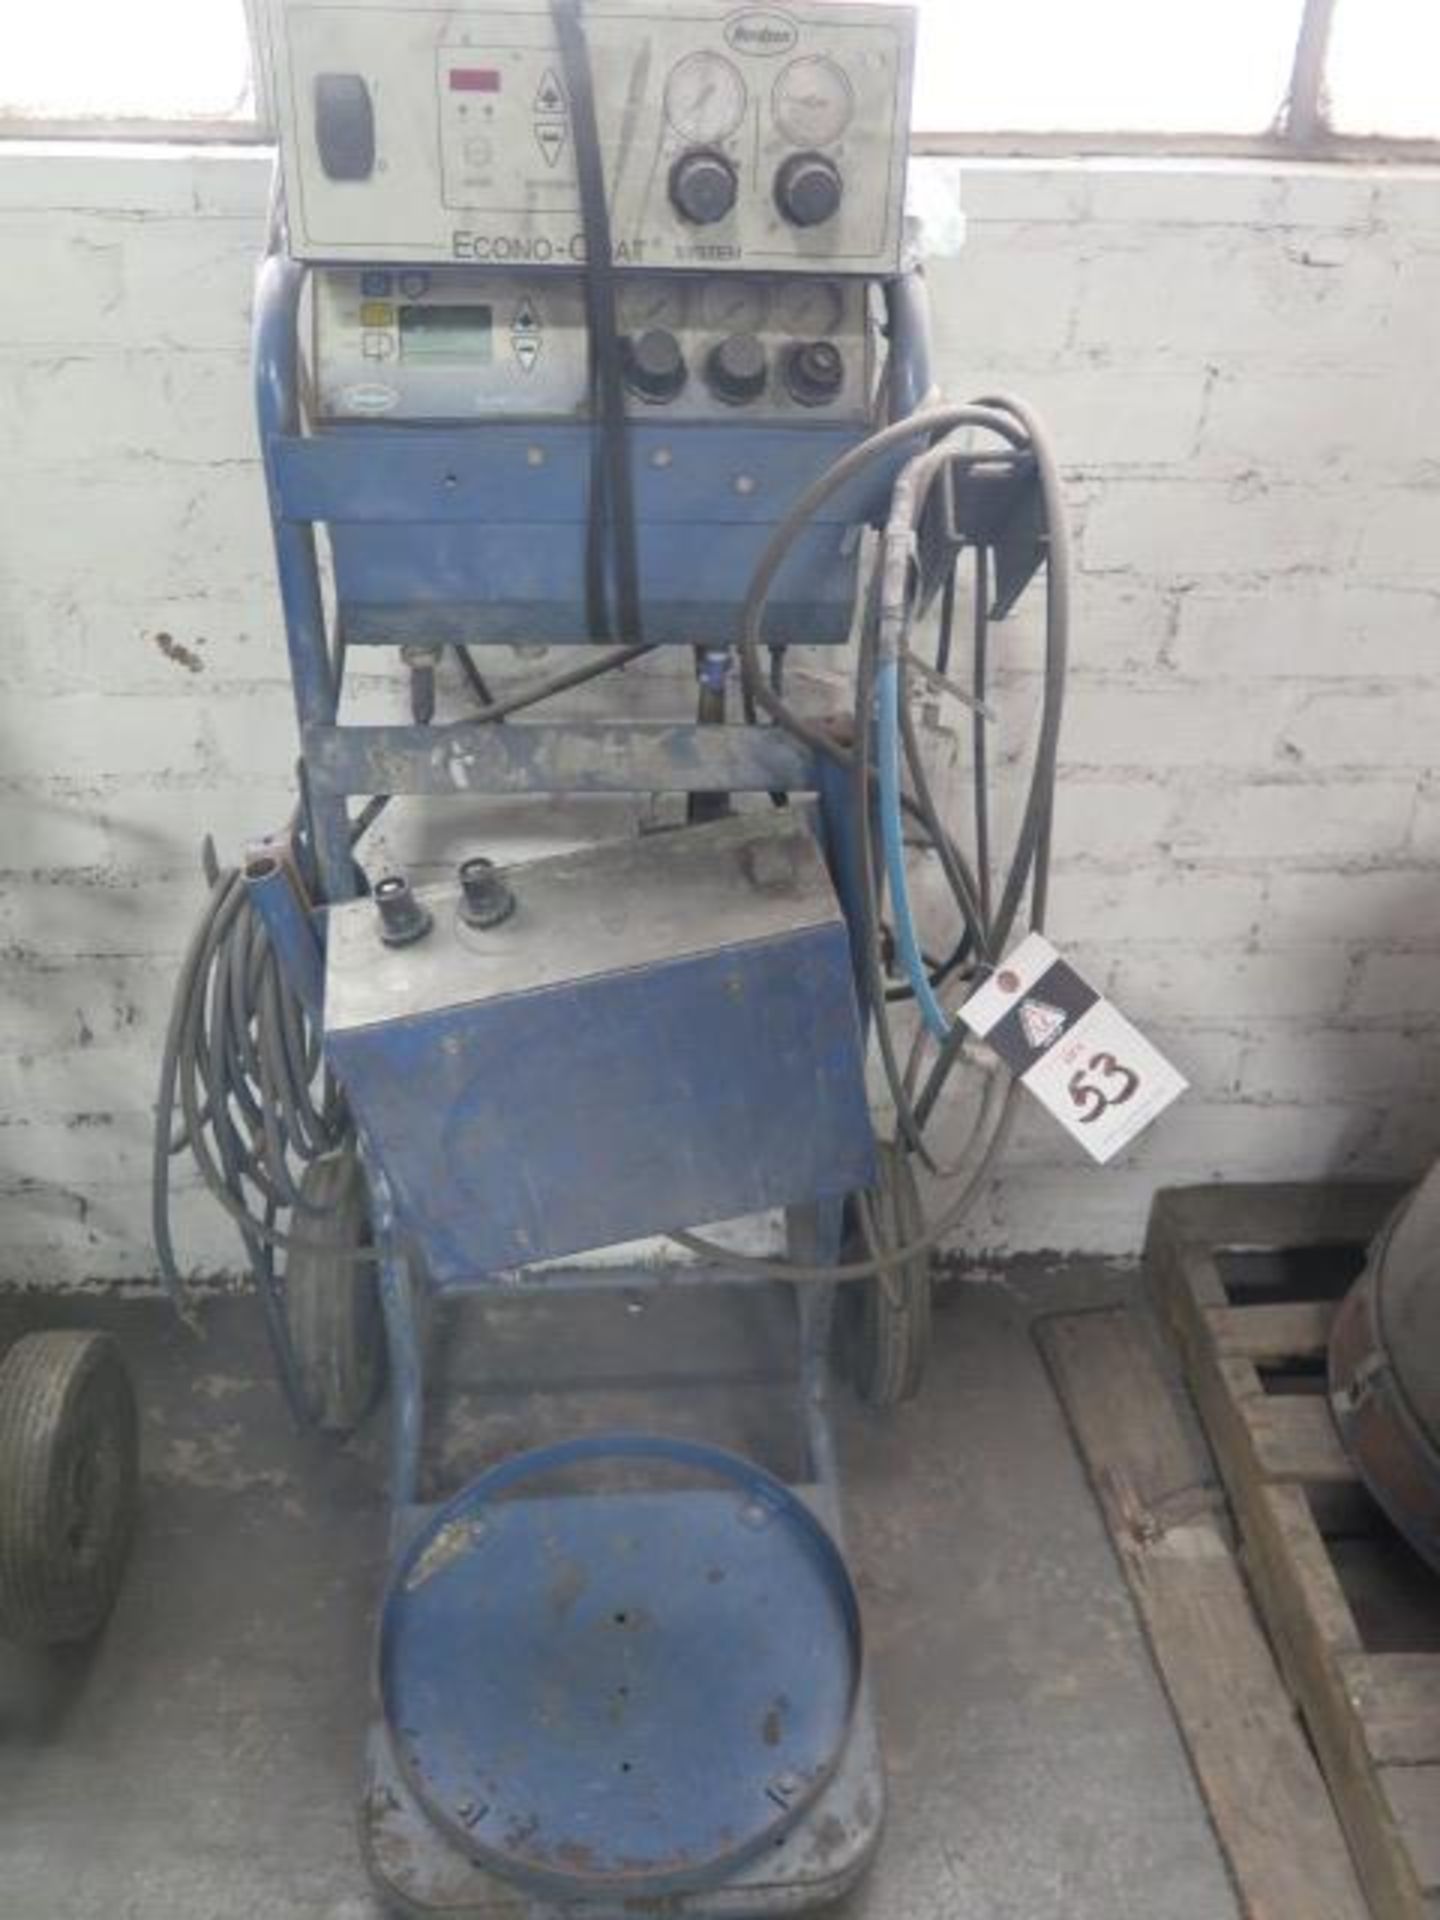 Nordson "Sure Coat" and Econo-Coat Powder Paing Systems (NO GUN) (SOLD AS-IS - NO WARRANTY)